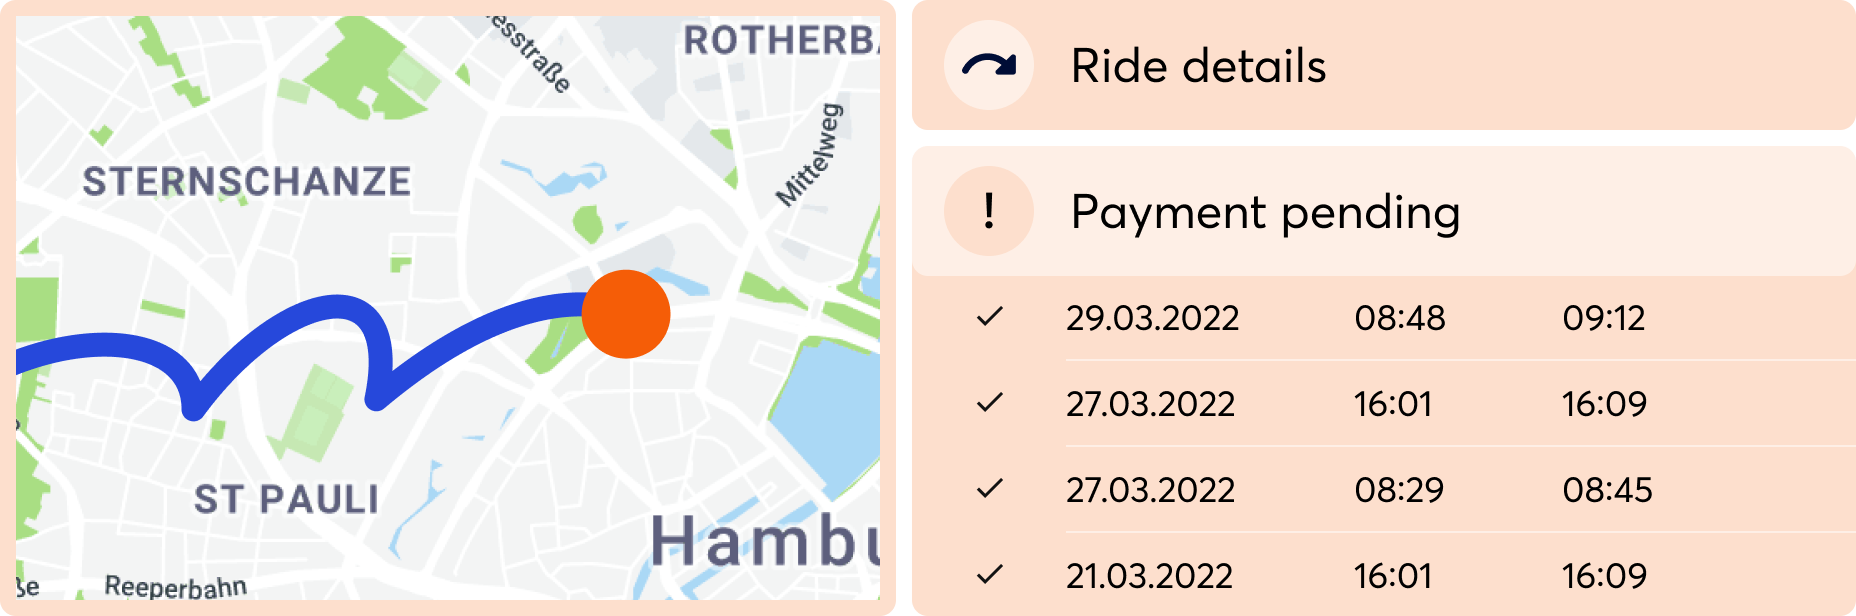 Ride detail overview and pending payments from different times and dates in orange, with a juxtaposed map overview image to the left of Sternschanze and St pauli.